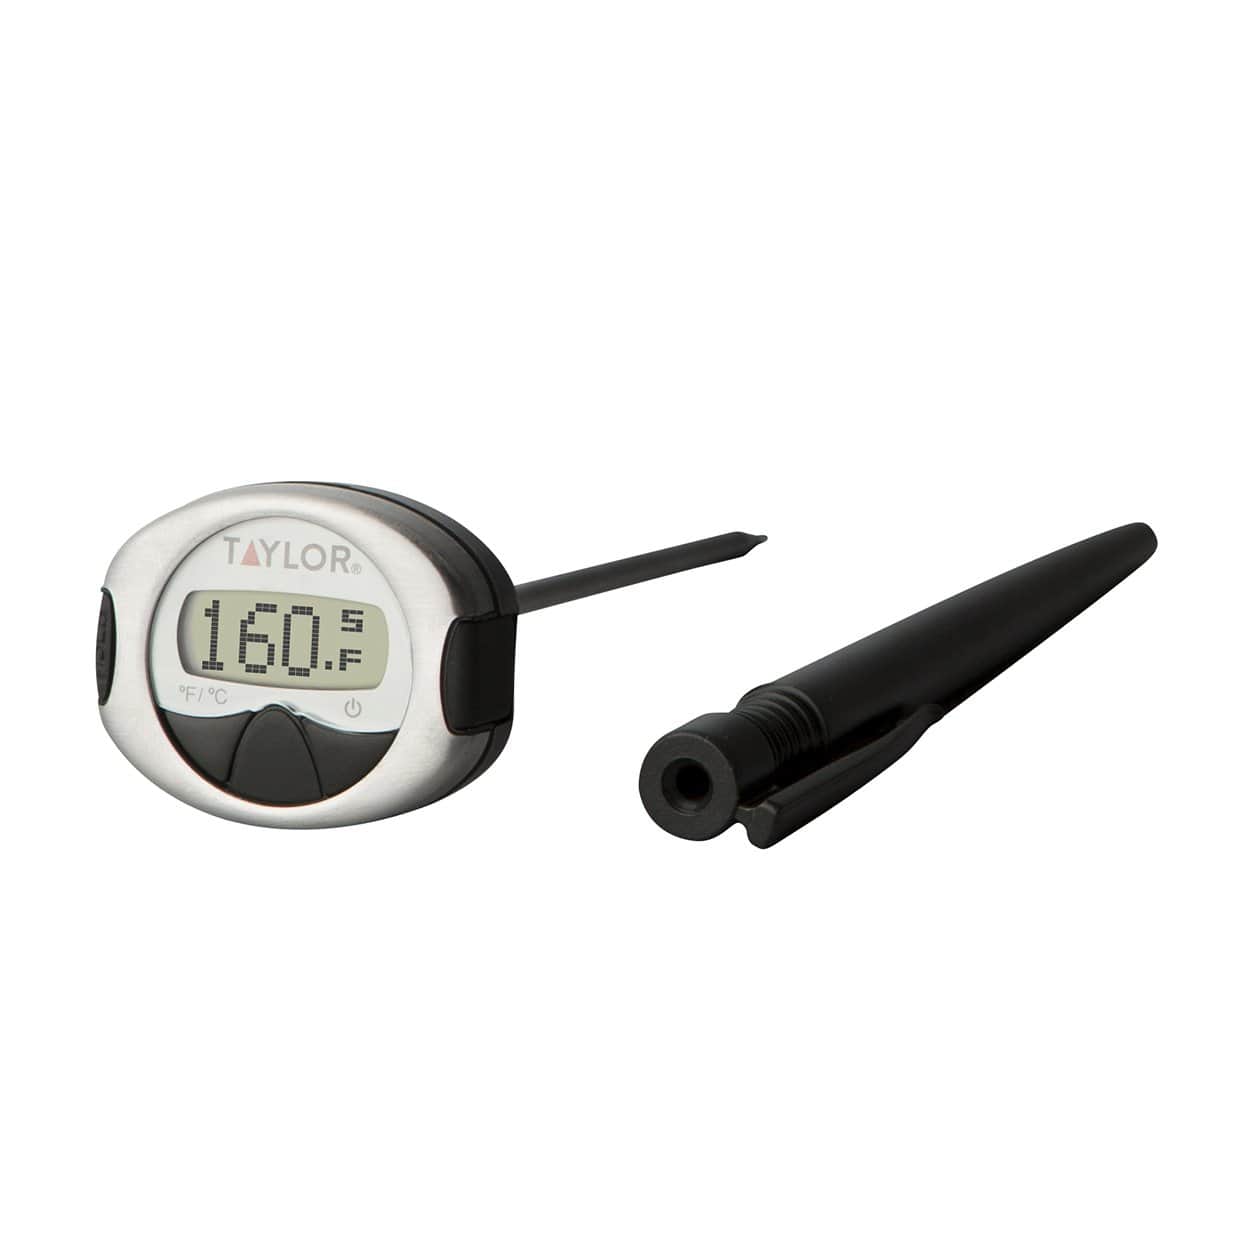 Taylor Digital Wired Probe Thermometer - Customized Temperature